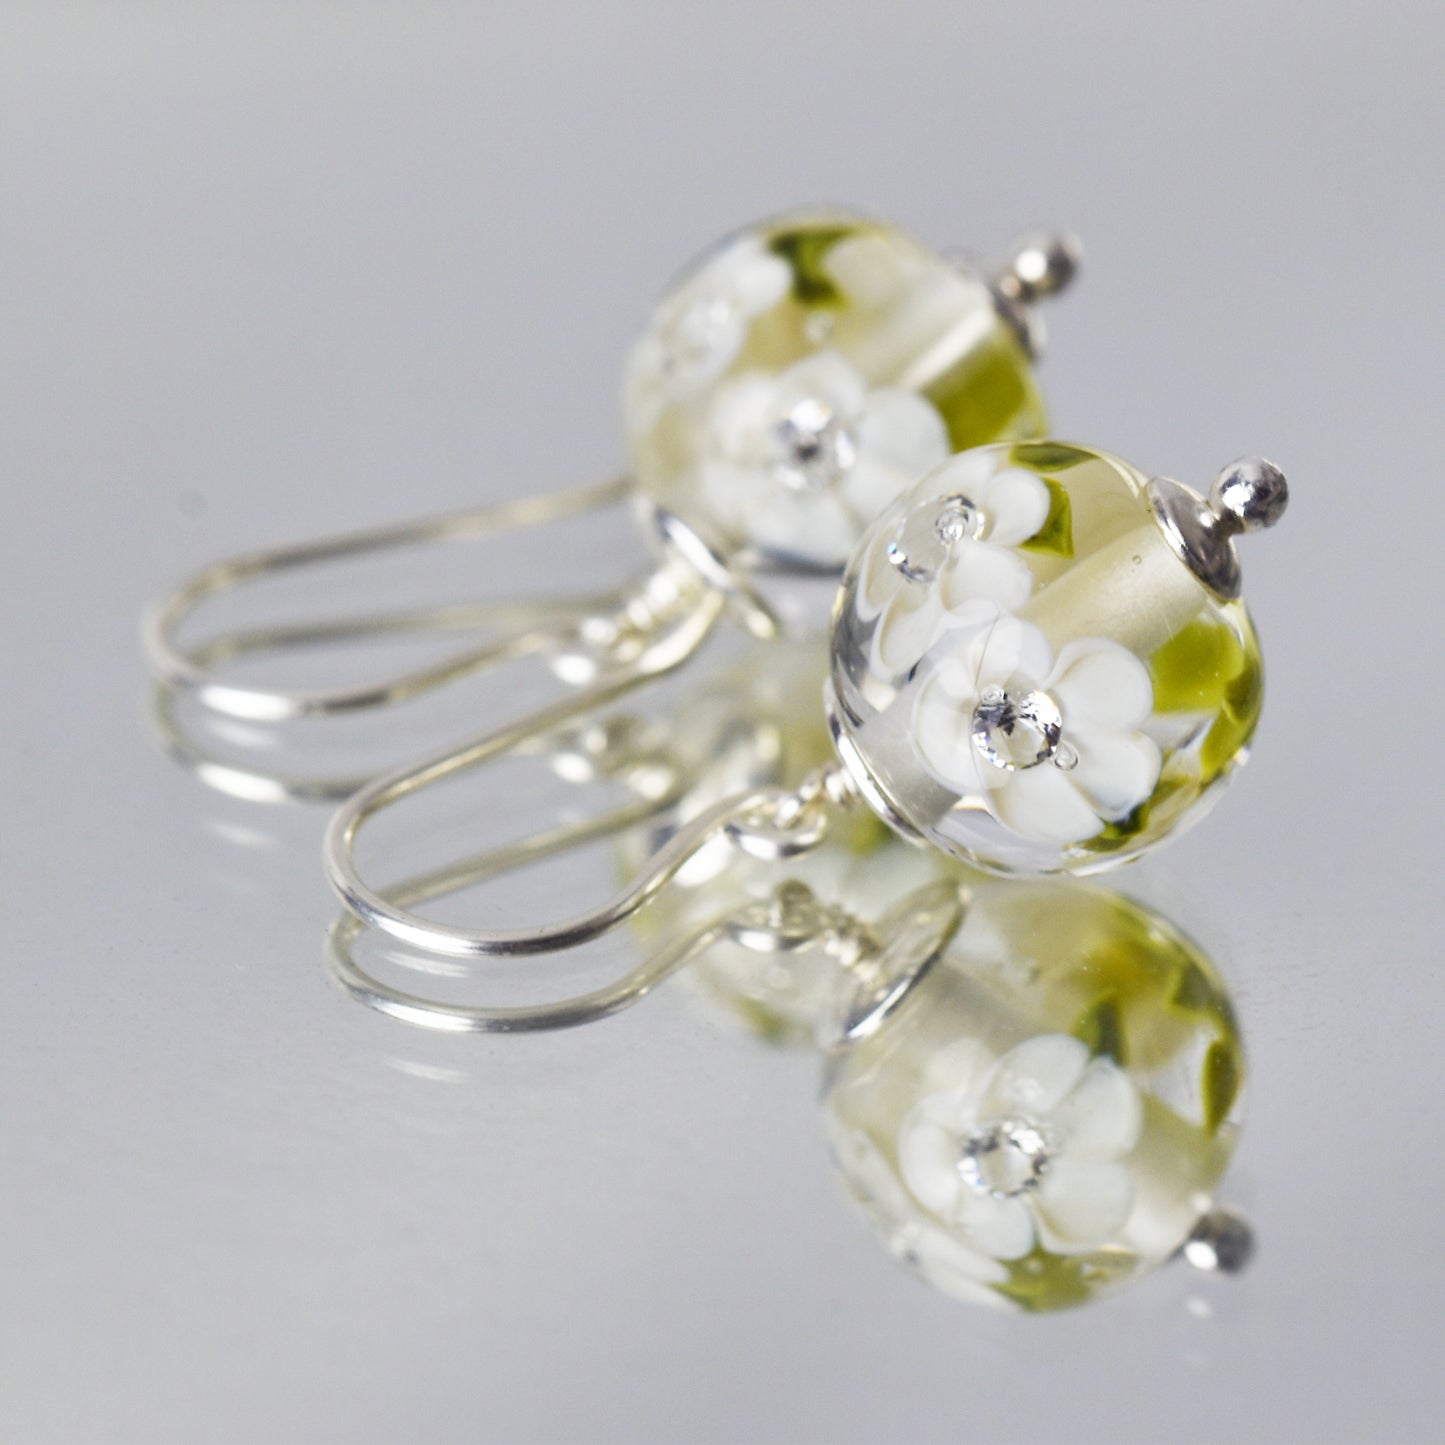 Earrings with white glass flowers